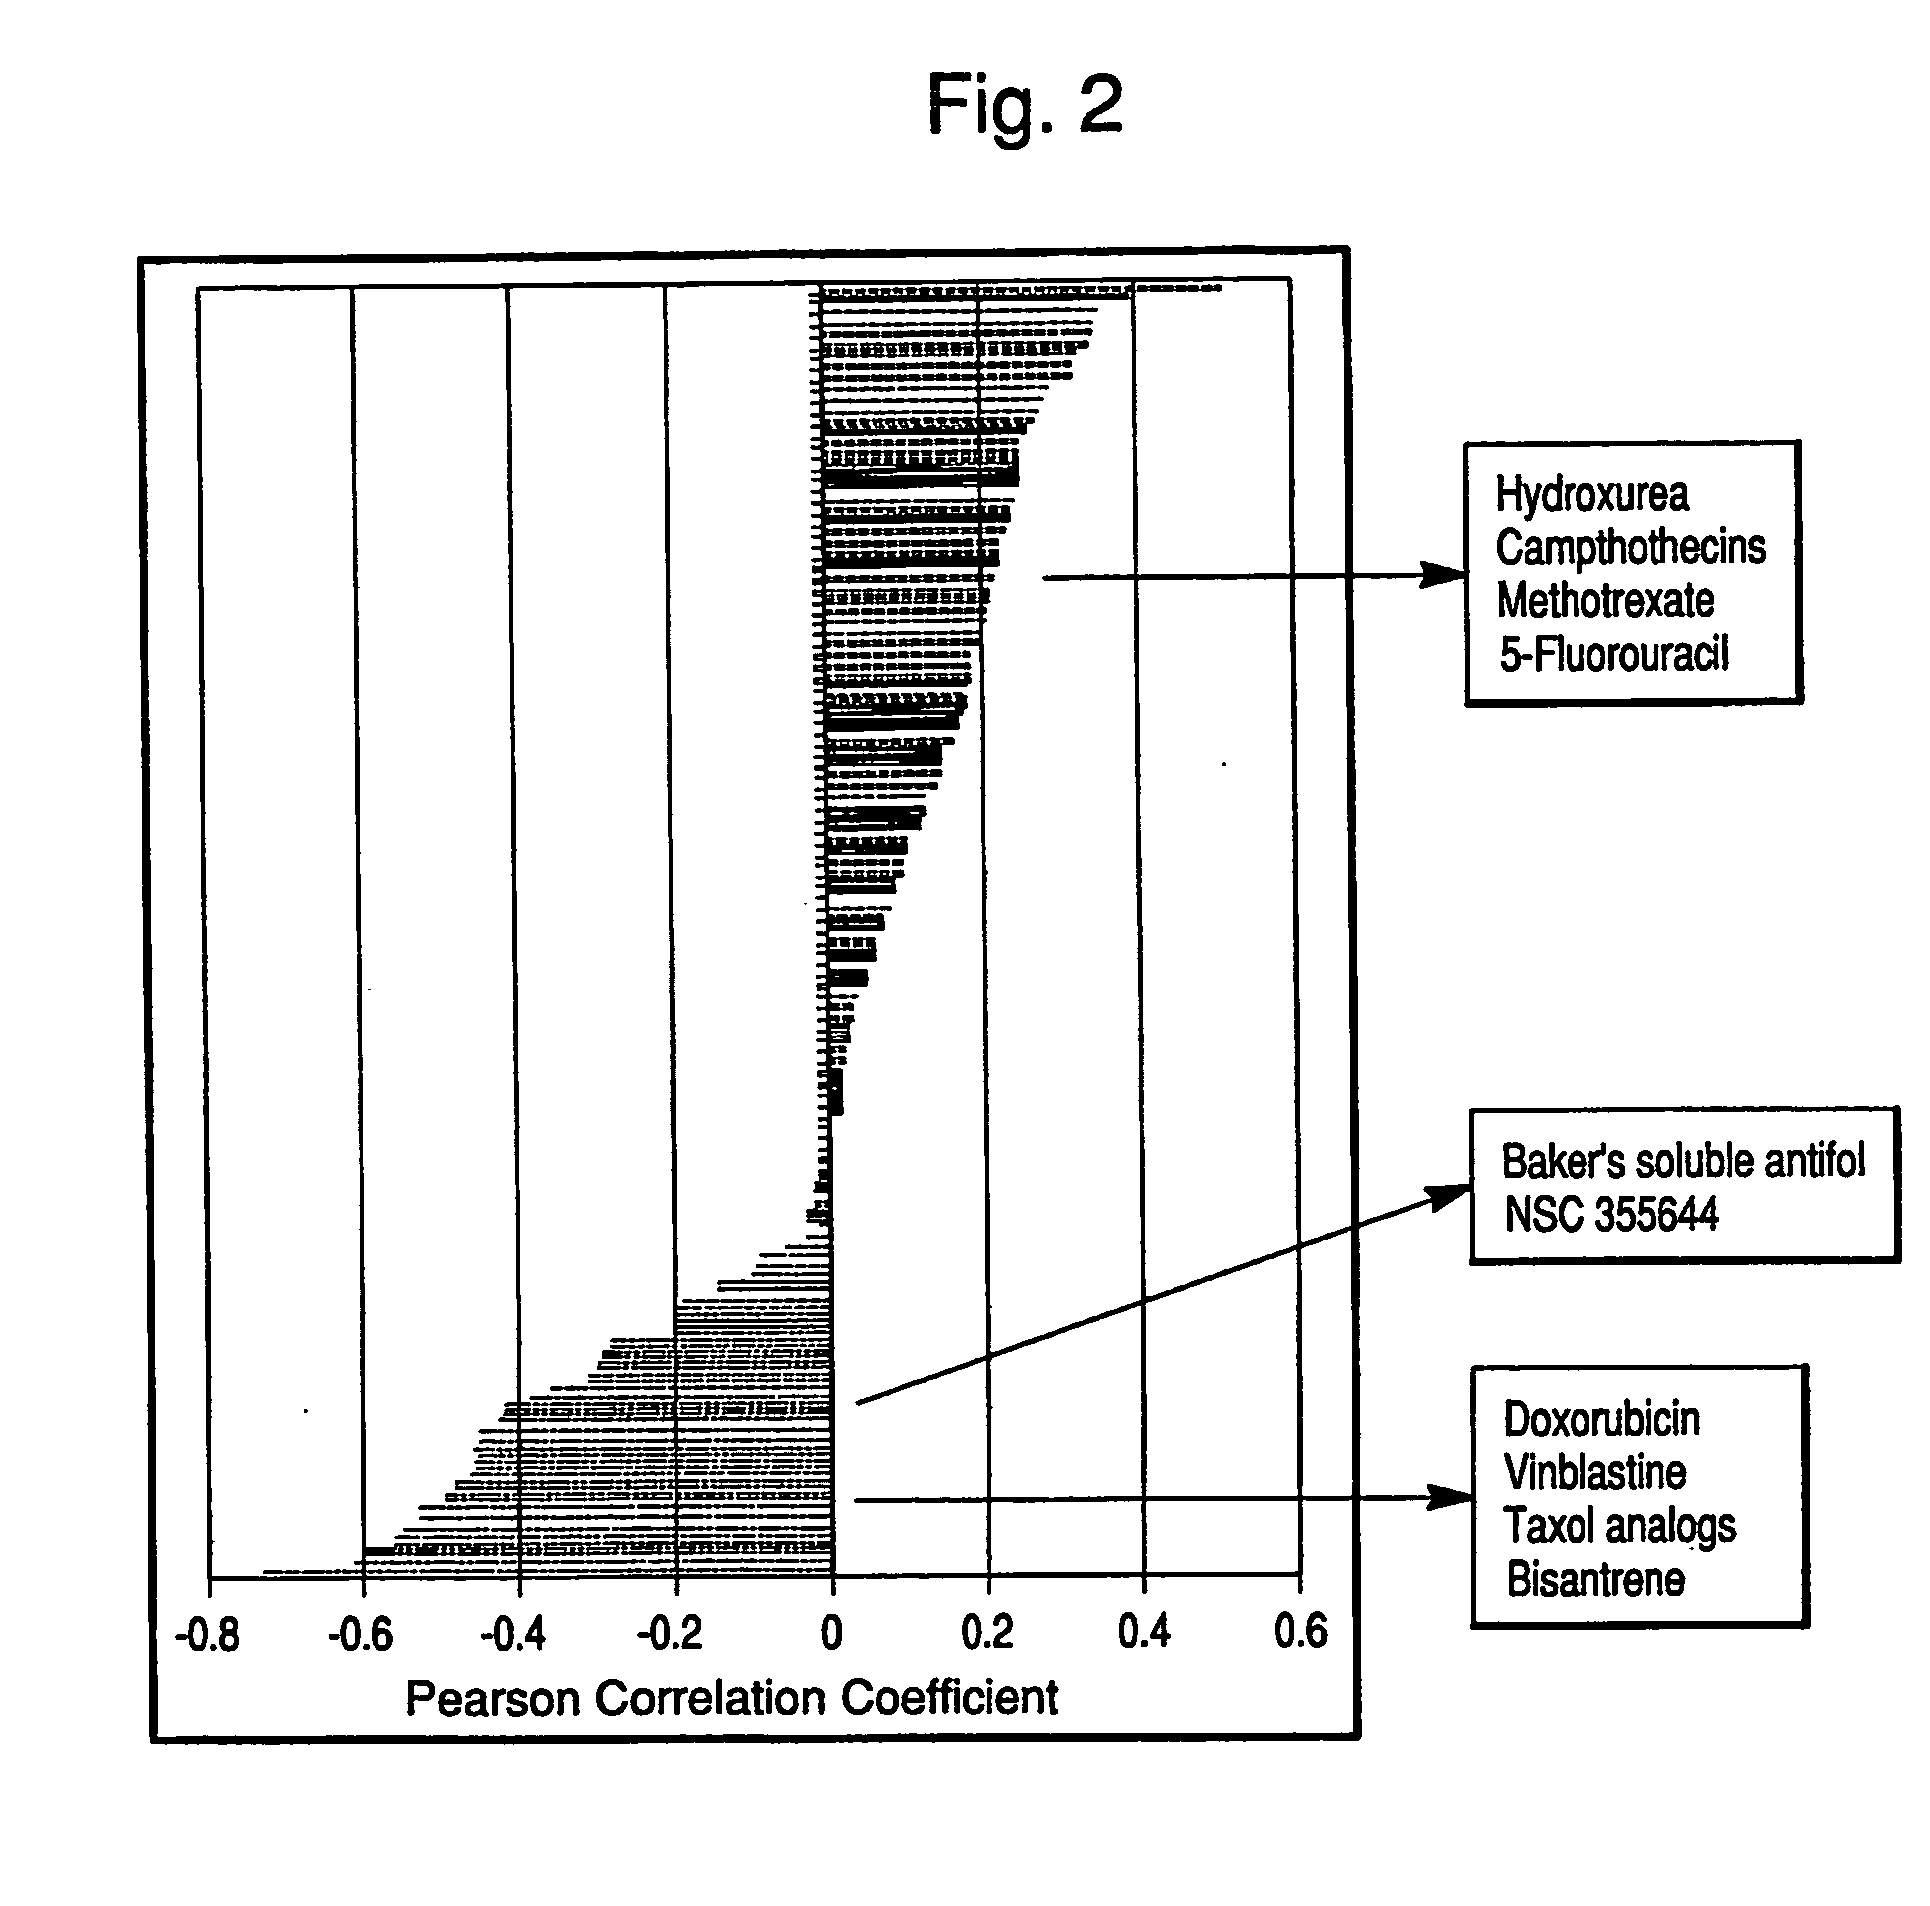 Methods for the Identification and Use of Compounds Suitable for the Treatment of Drug Resistant Cancer Cells